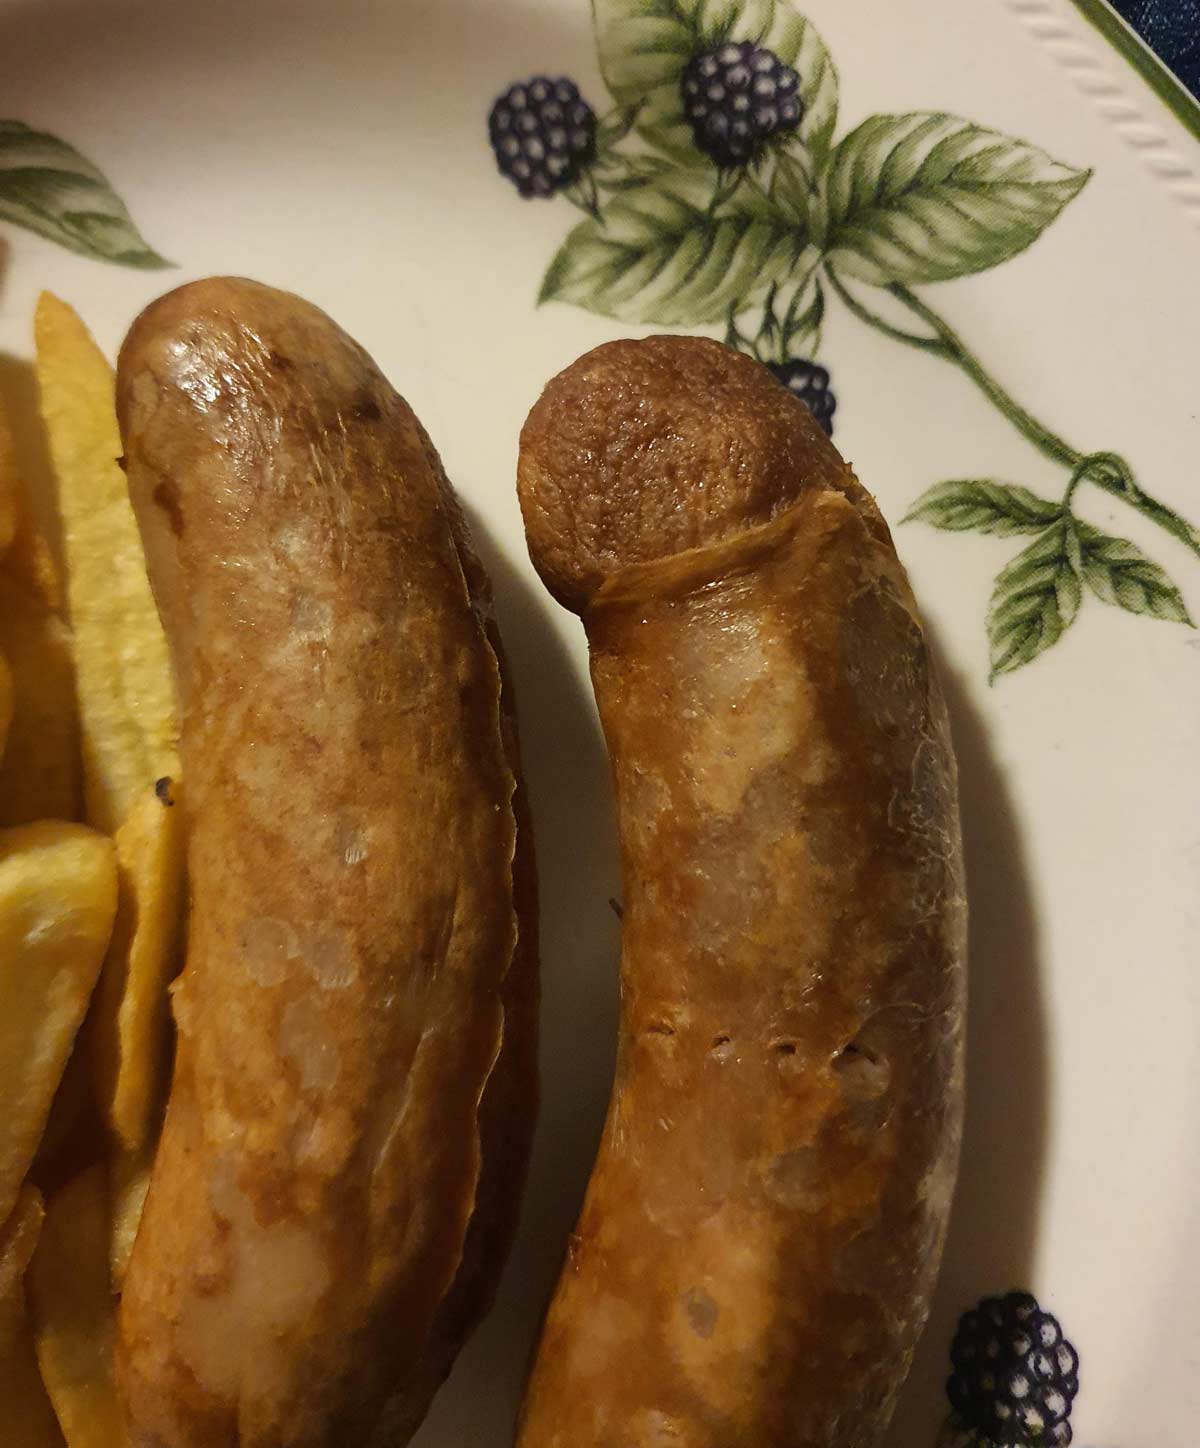 This sausage from my local fish & chip shop